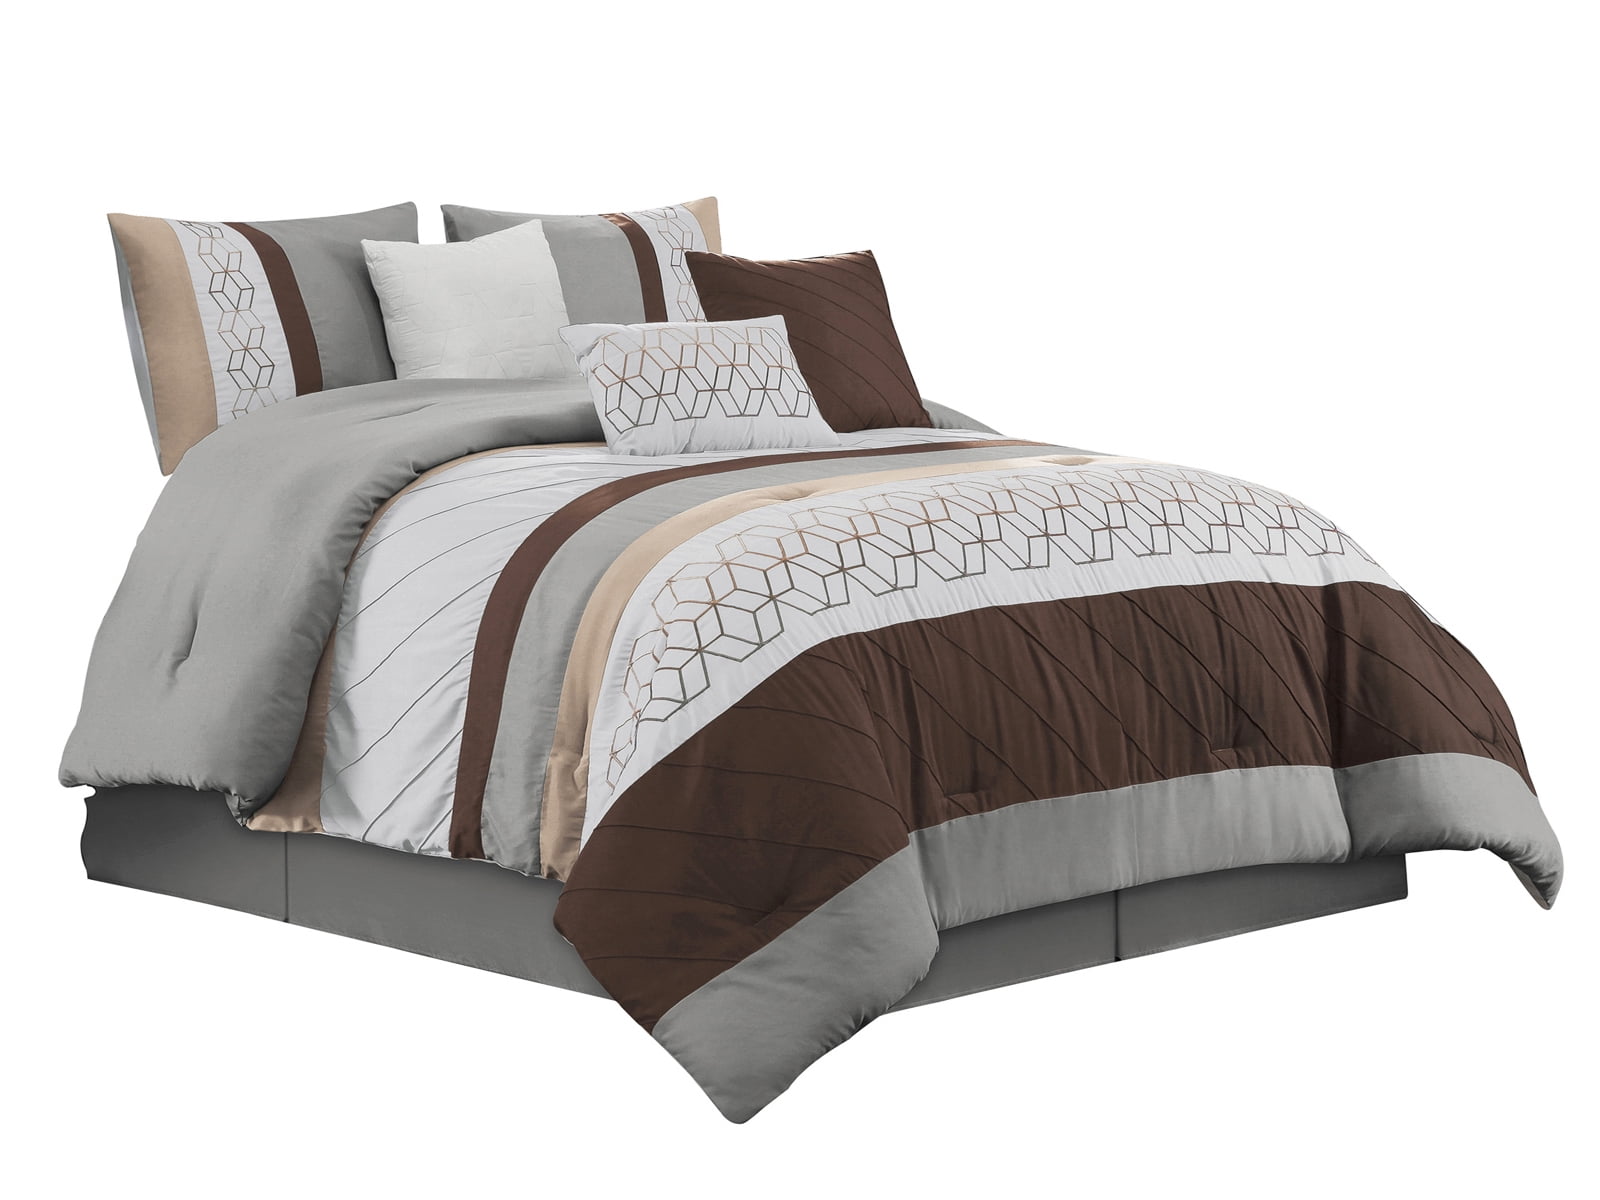 Gray And Brown Bedding Sets - Bedding Design Ideas